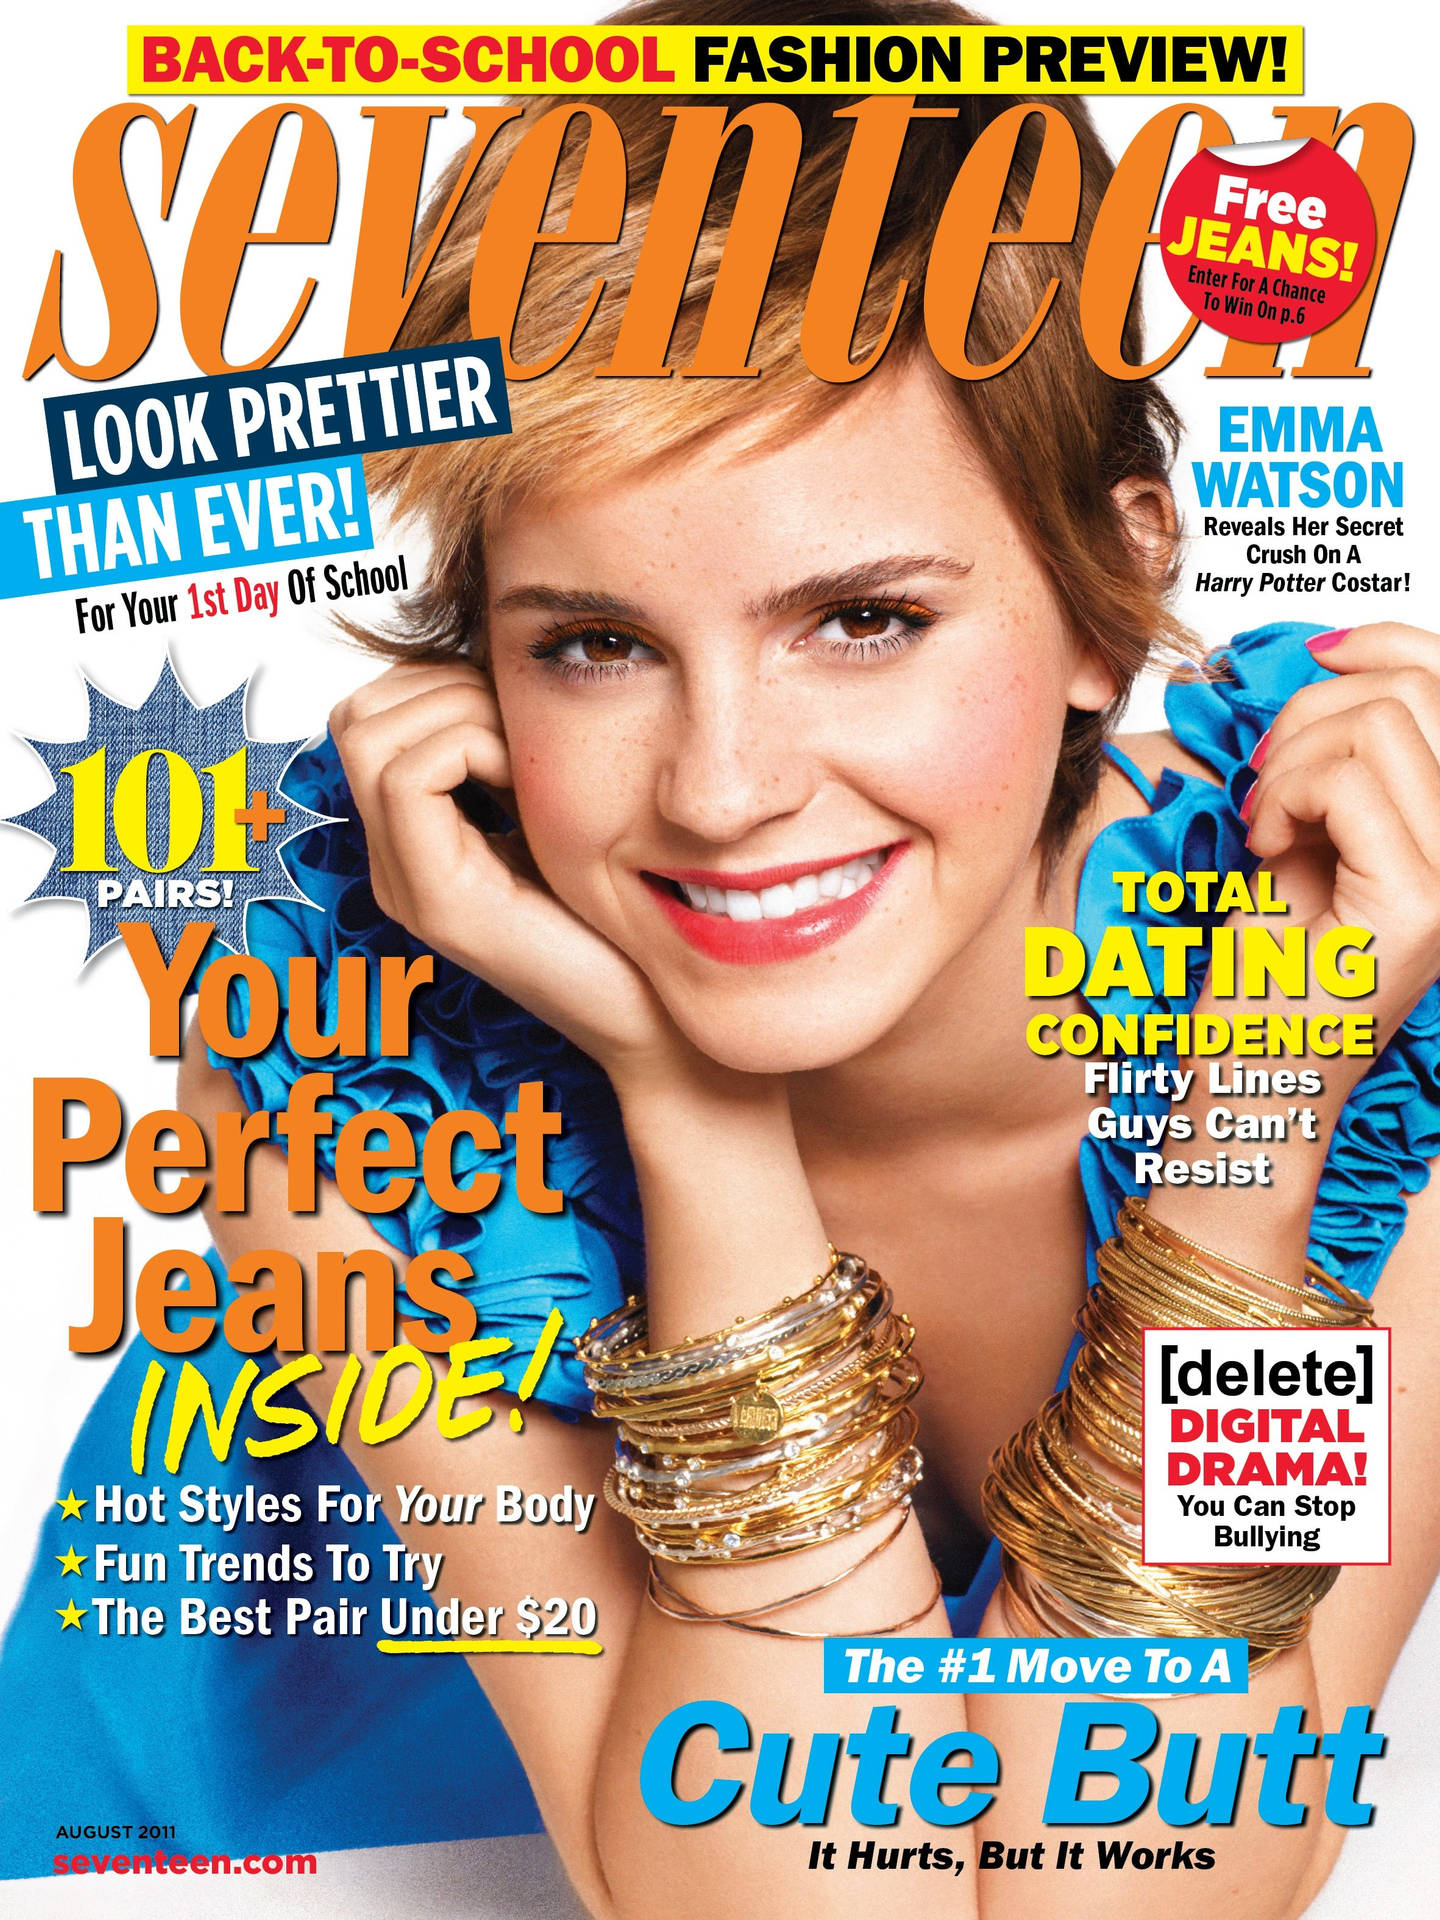 Emma Watson Fashion Preview Cover Background